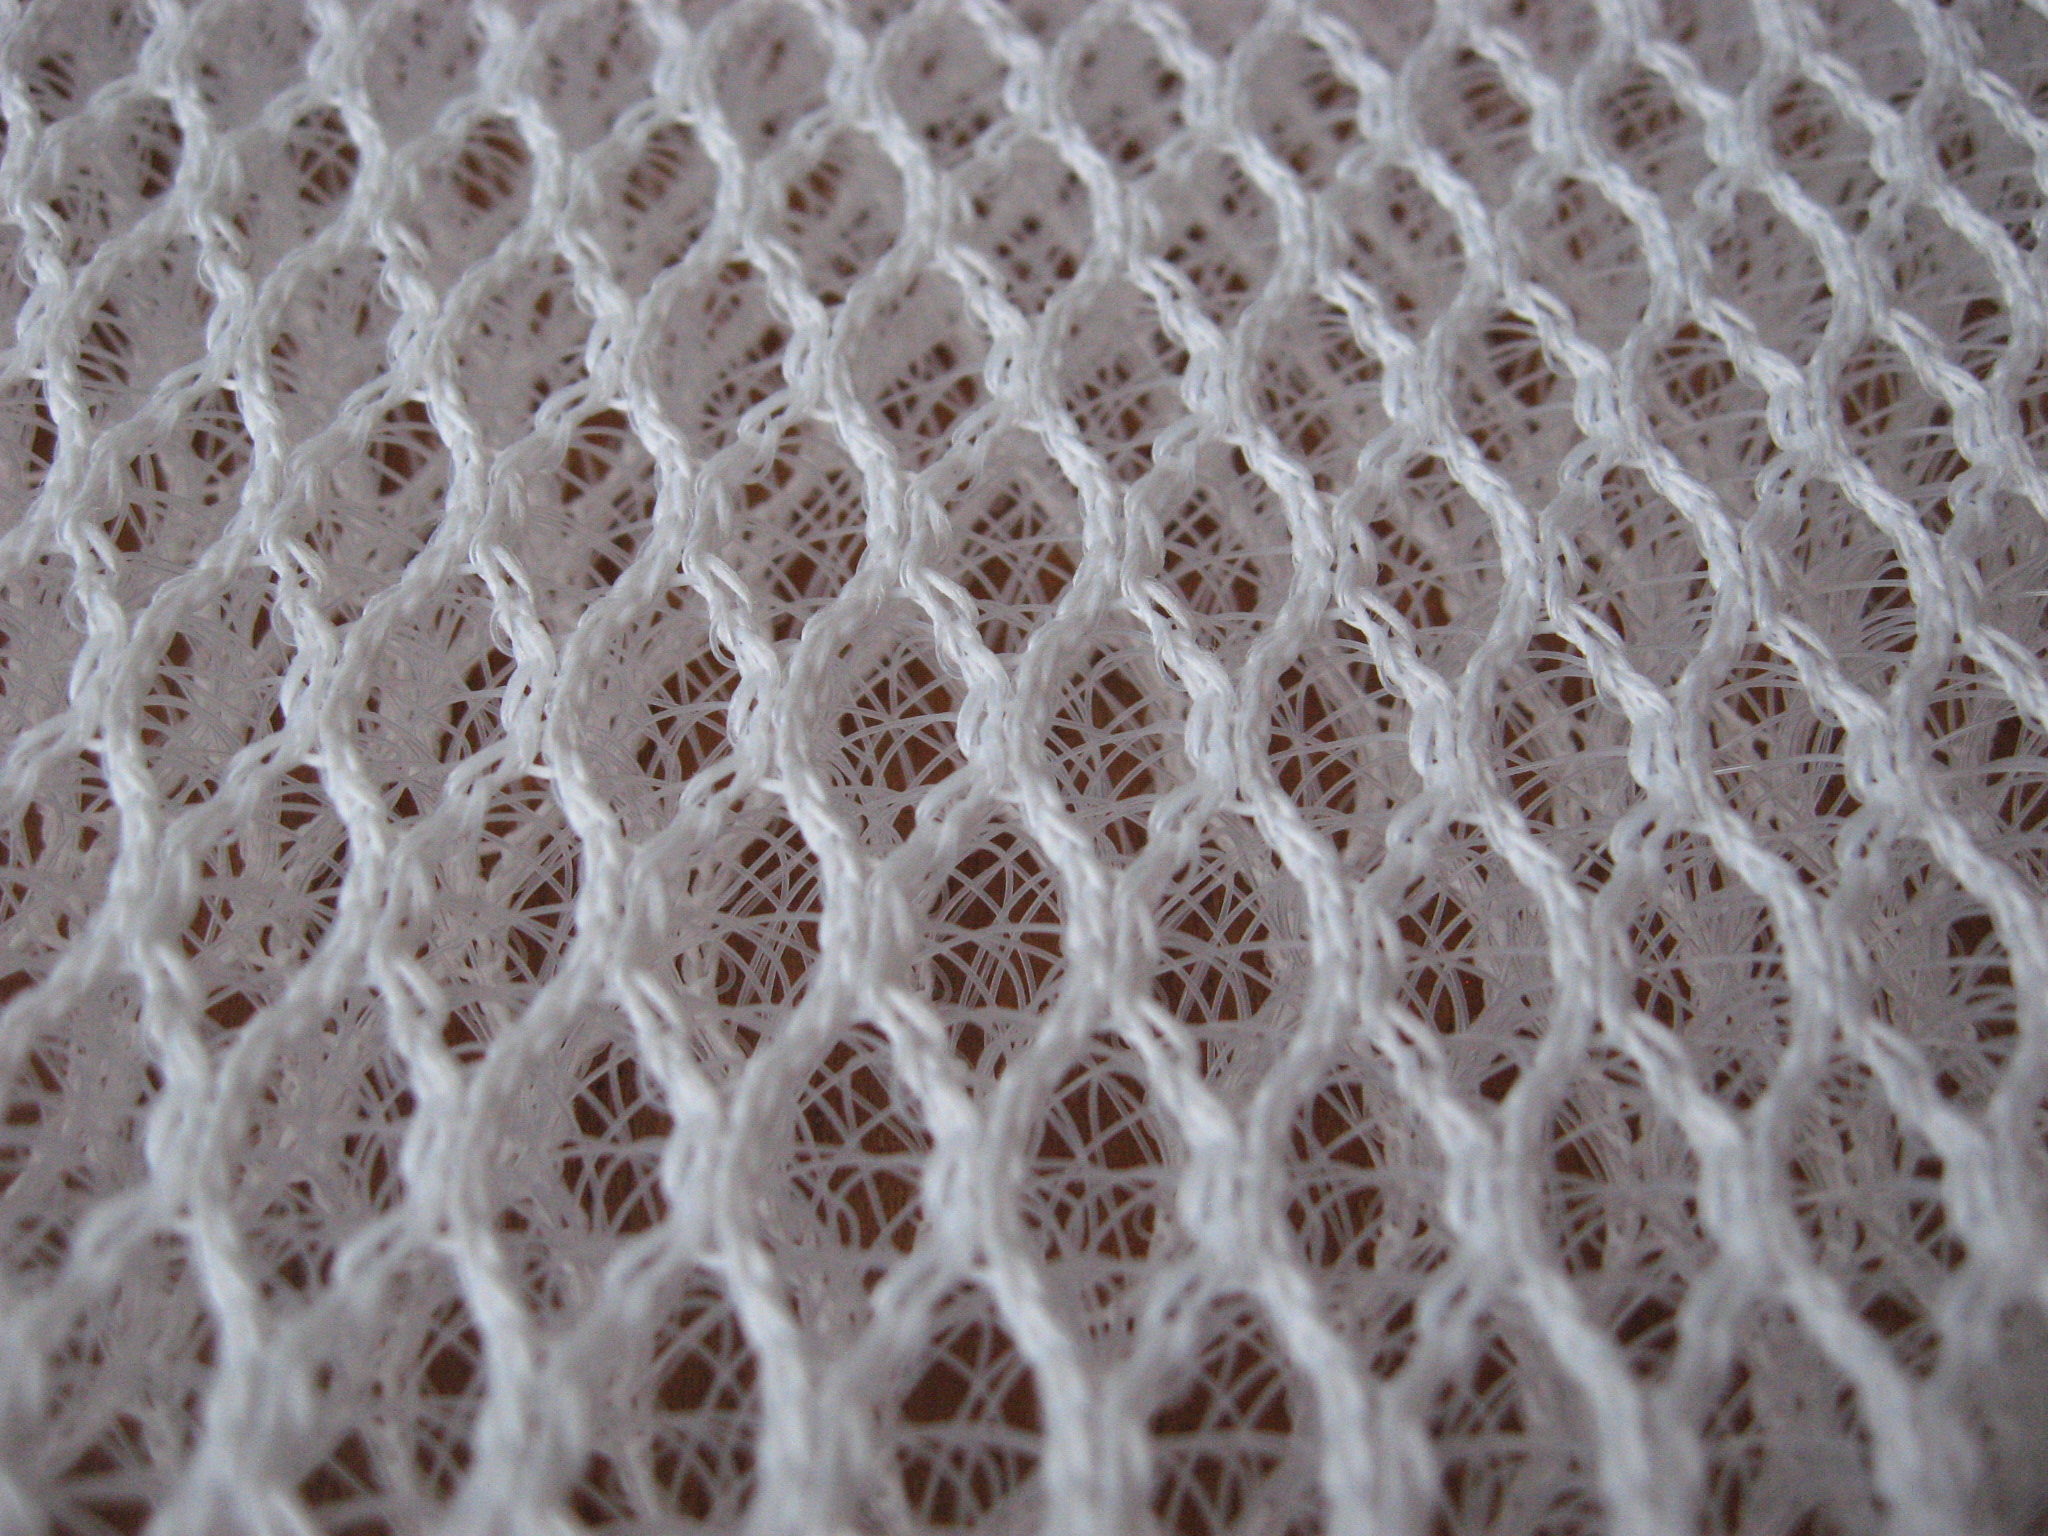 File:Spacer fabric 2.JPG - Wikimedia Commons